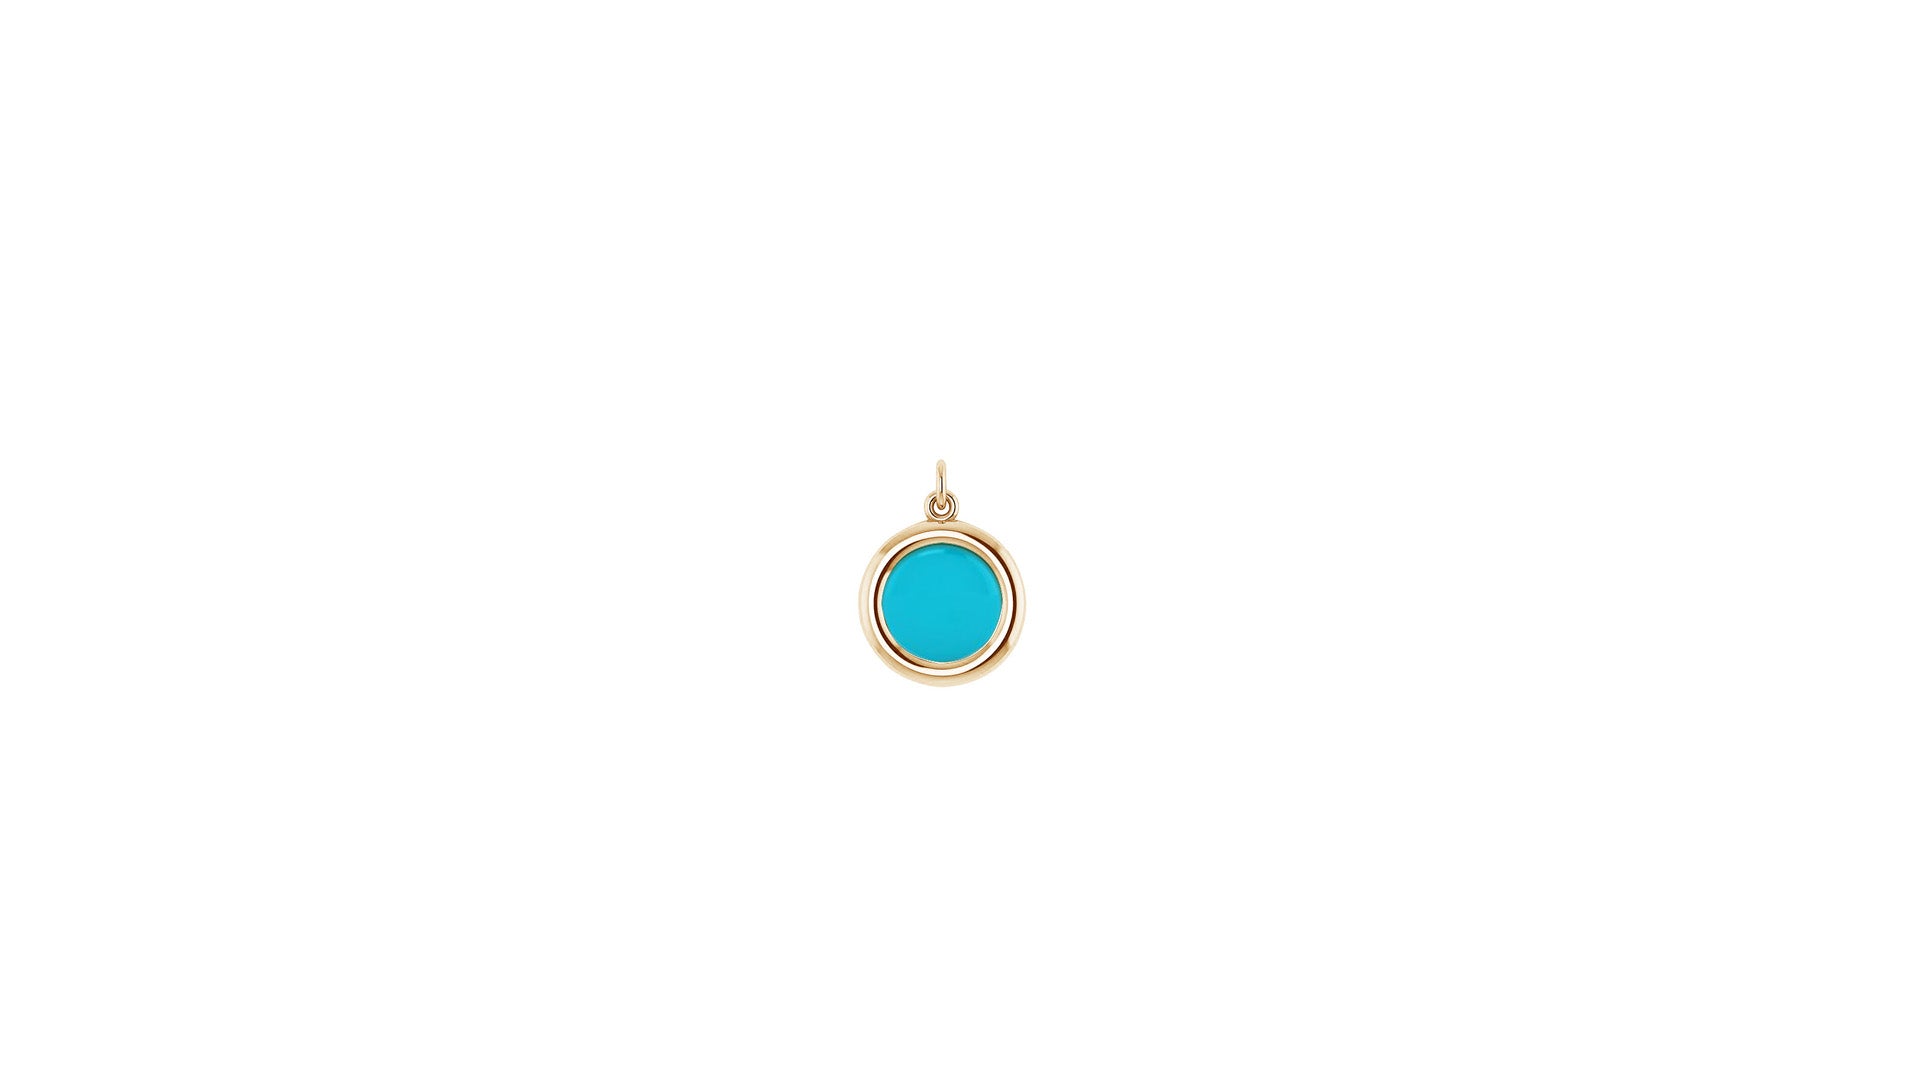 December Turquoise Charm in 14kt Gold